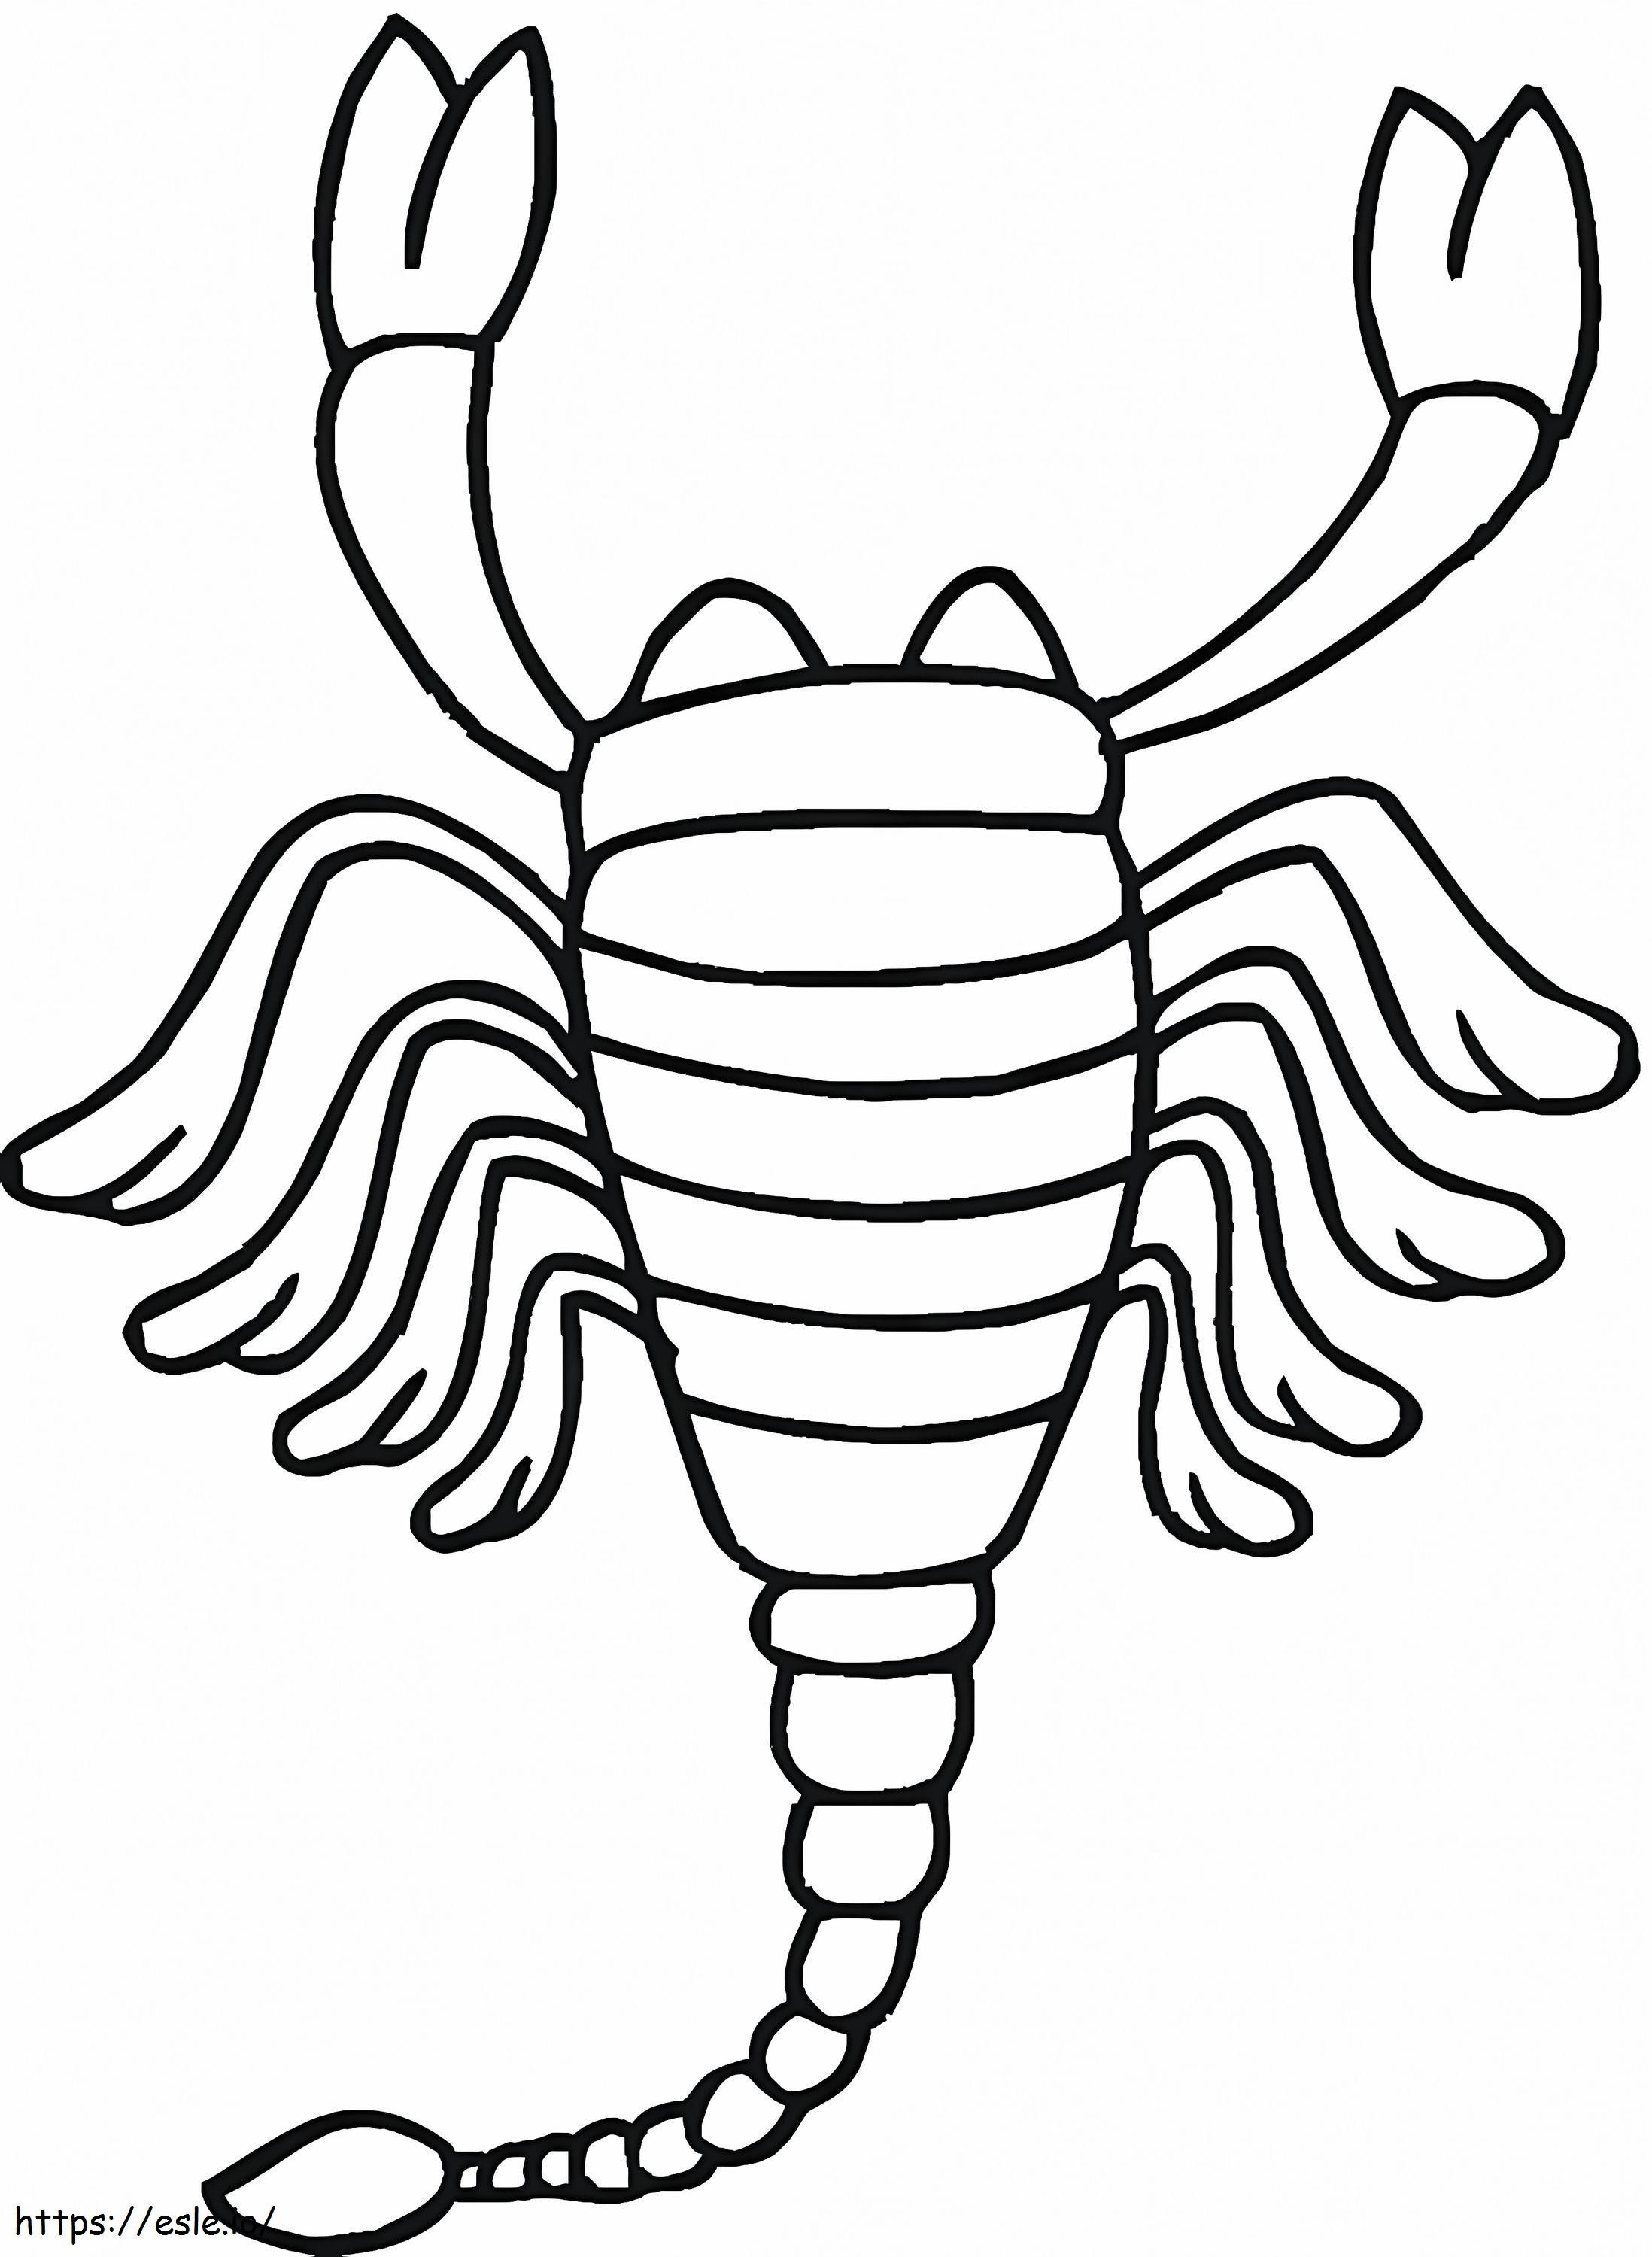 Scorpion 10 coloring page